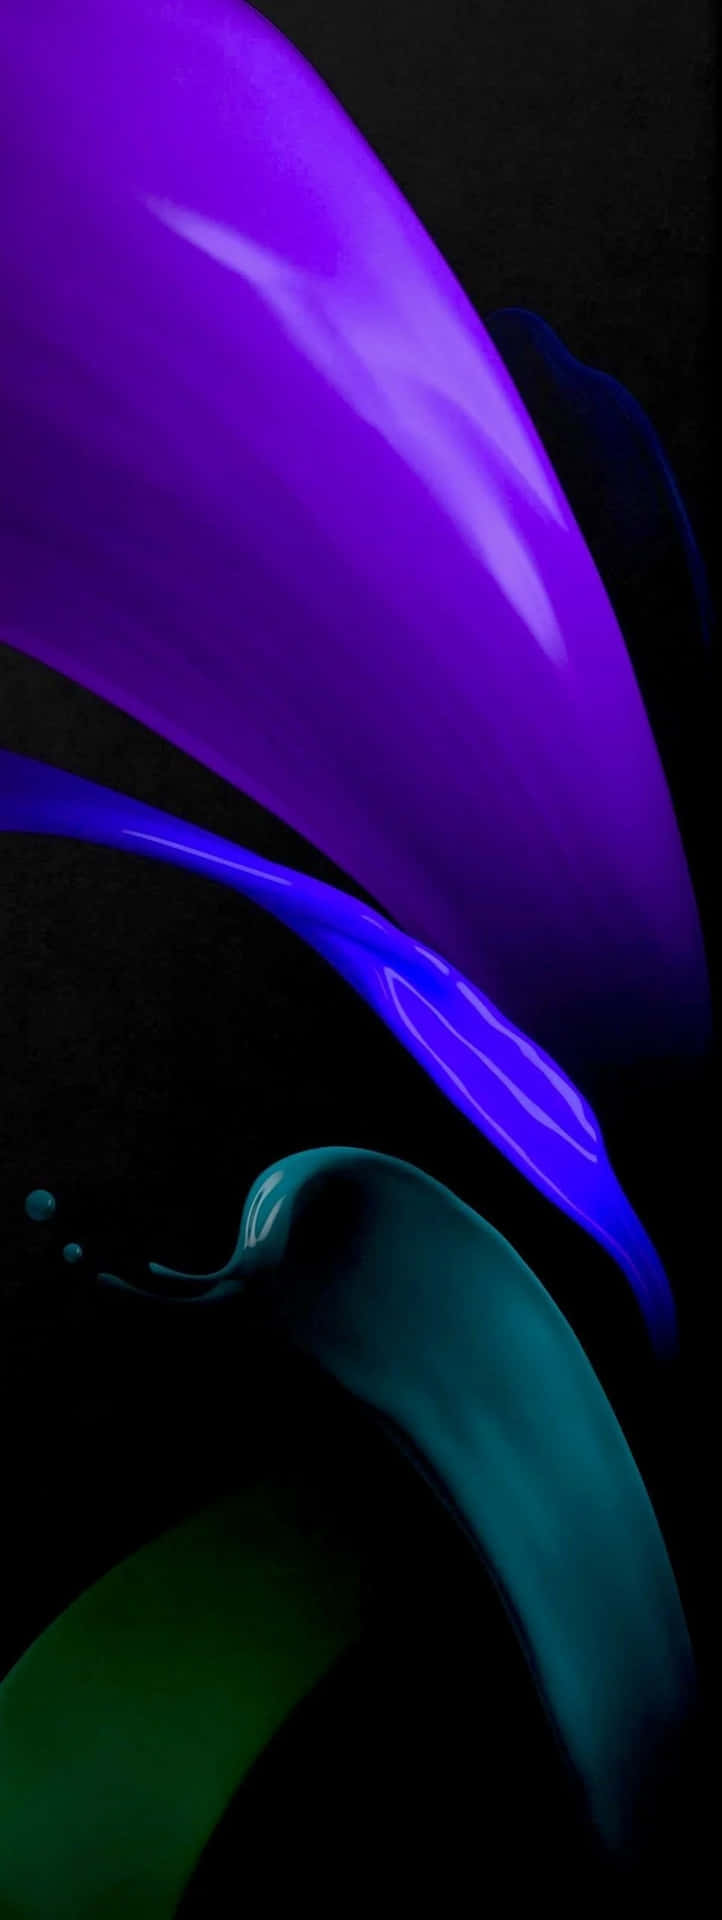 Get The Most Out Of Your Mobile Experience With the Samsung M51 Wallpaper